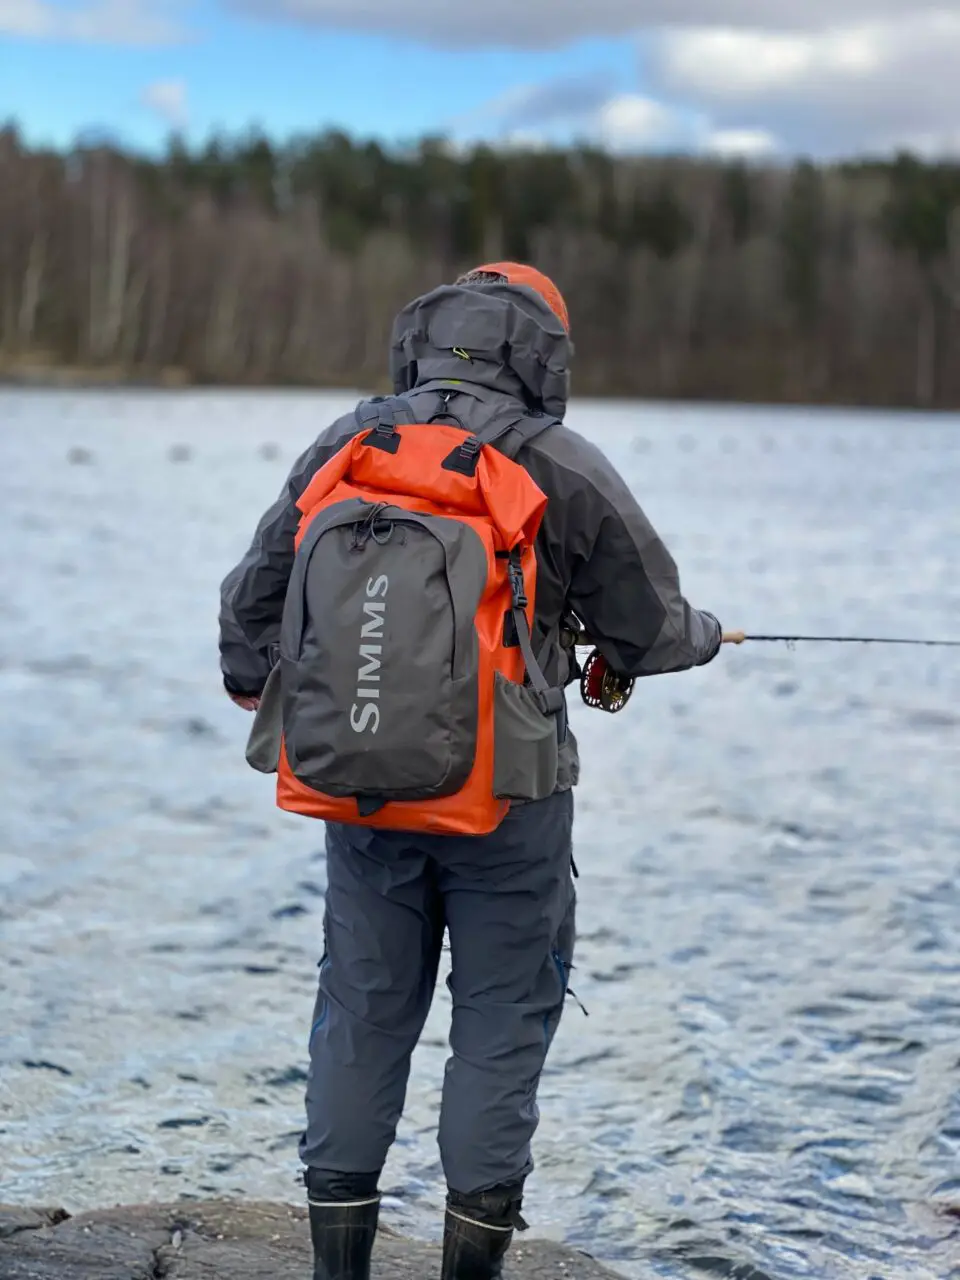 A waterproof fishing backpack can be a great option when out in the wild